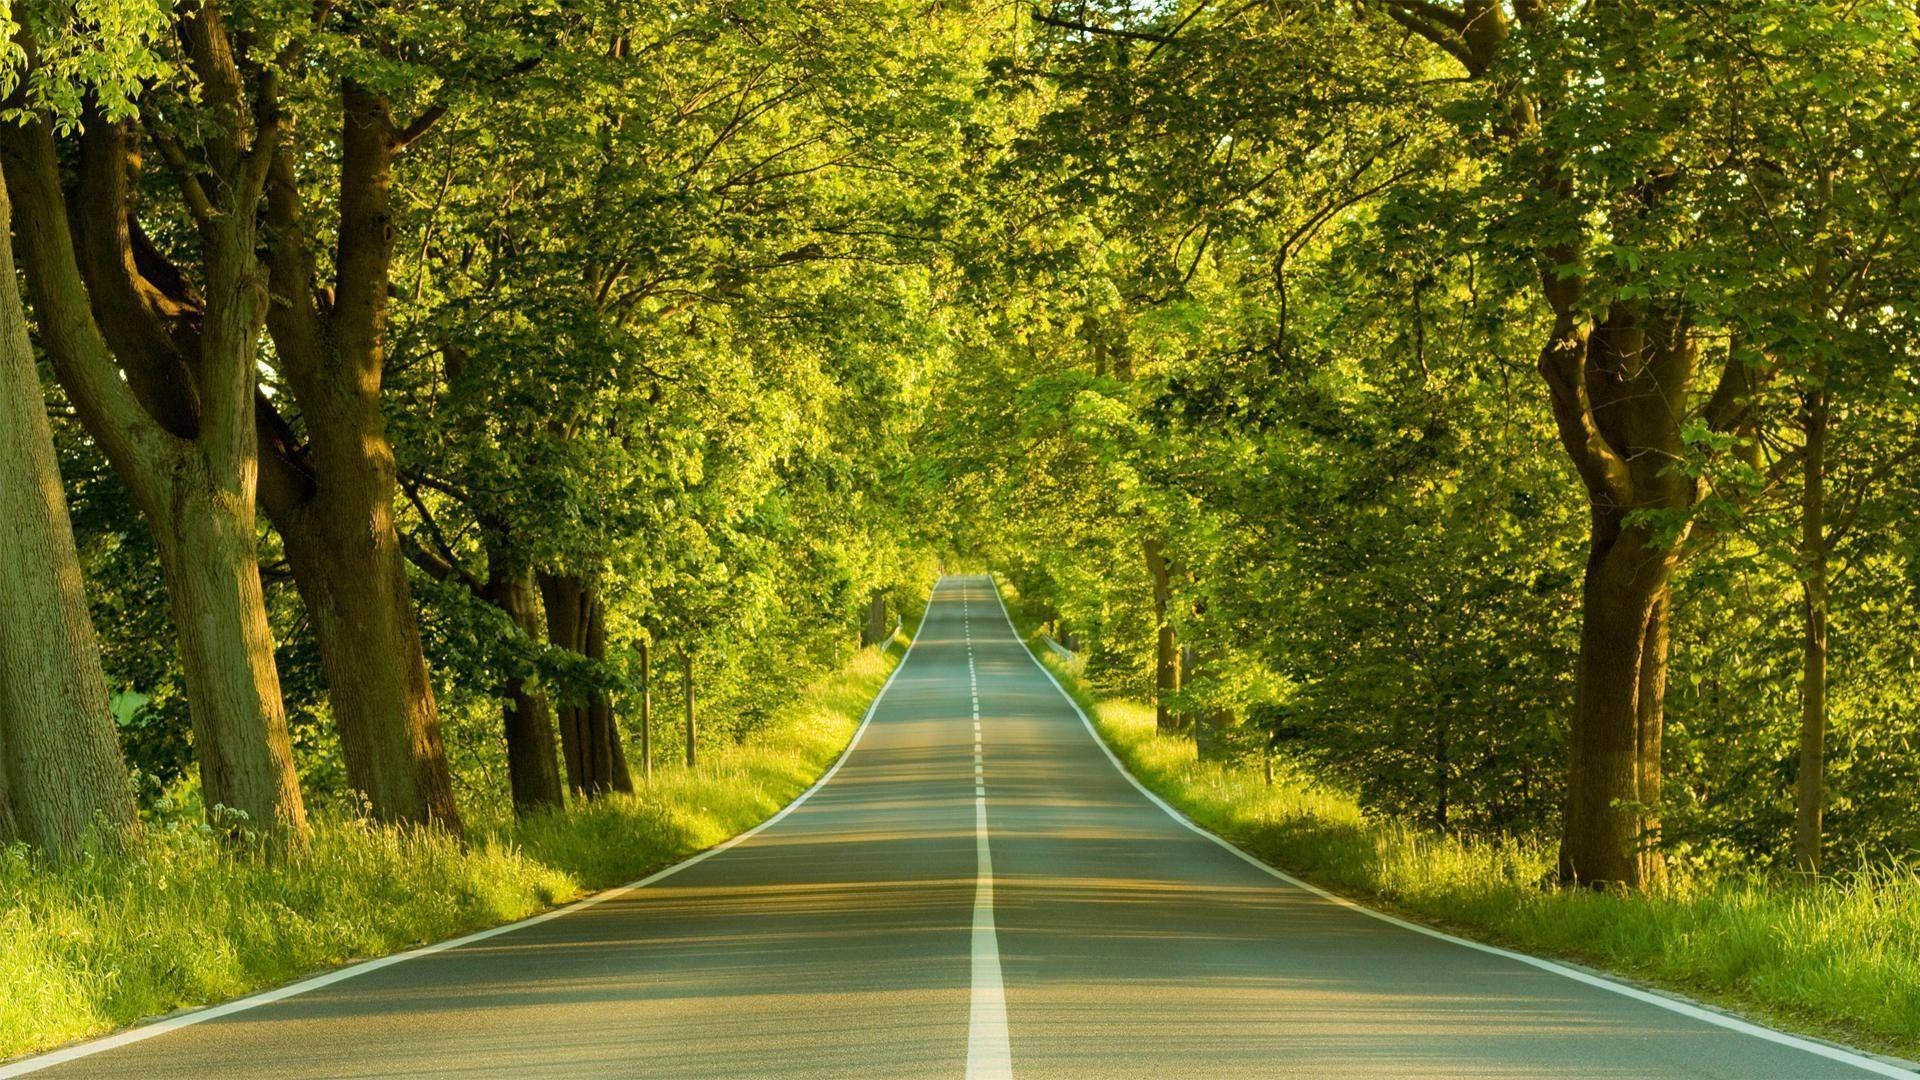 Hd Nature Trees And Road Background